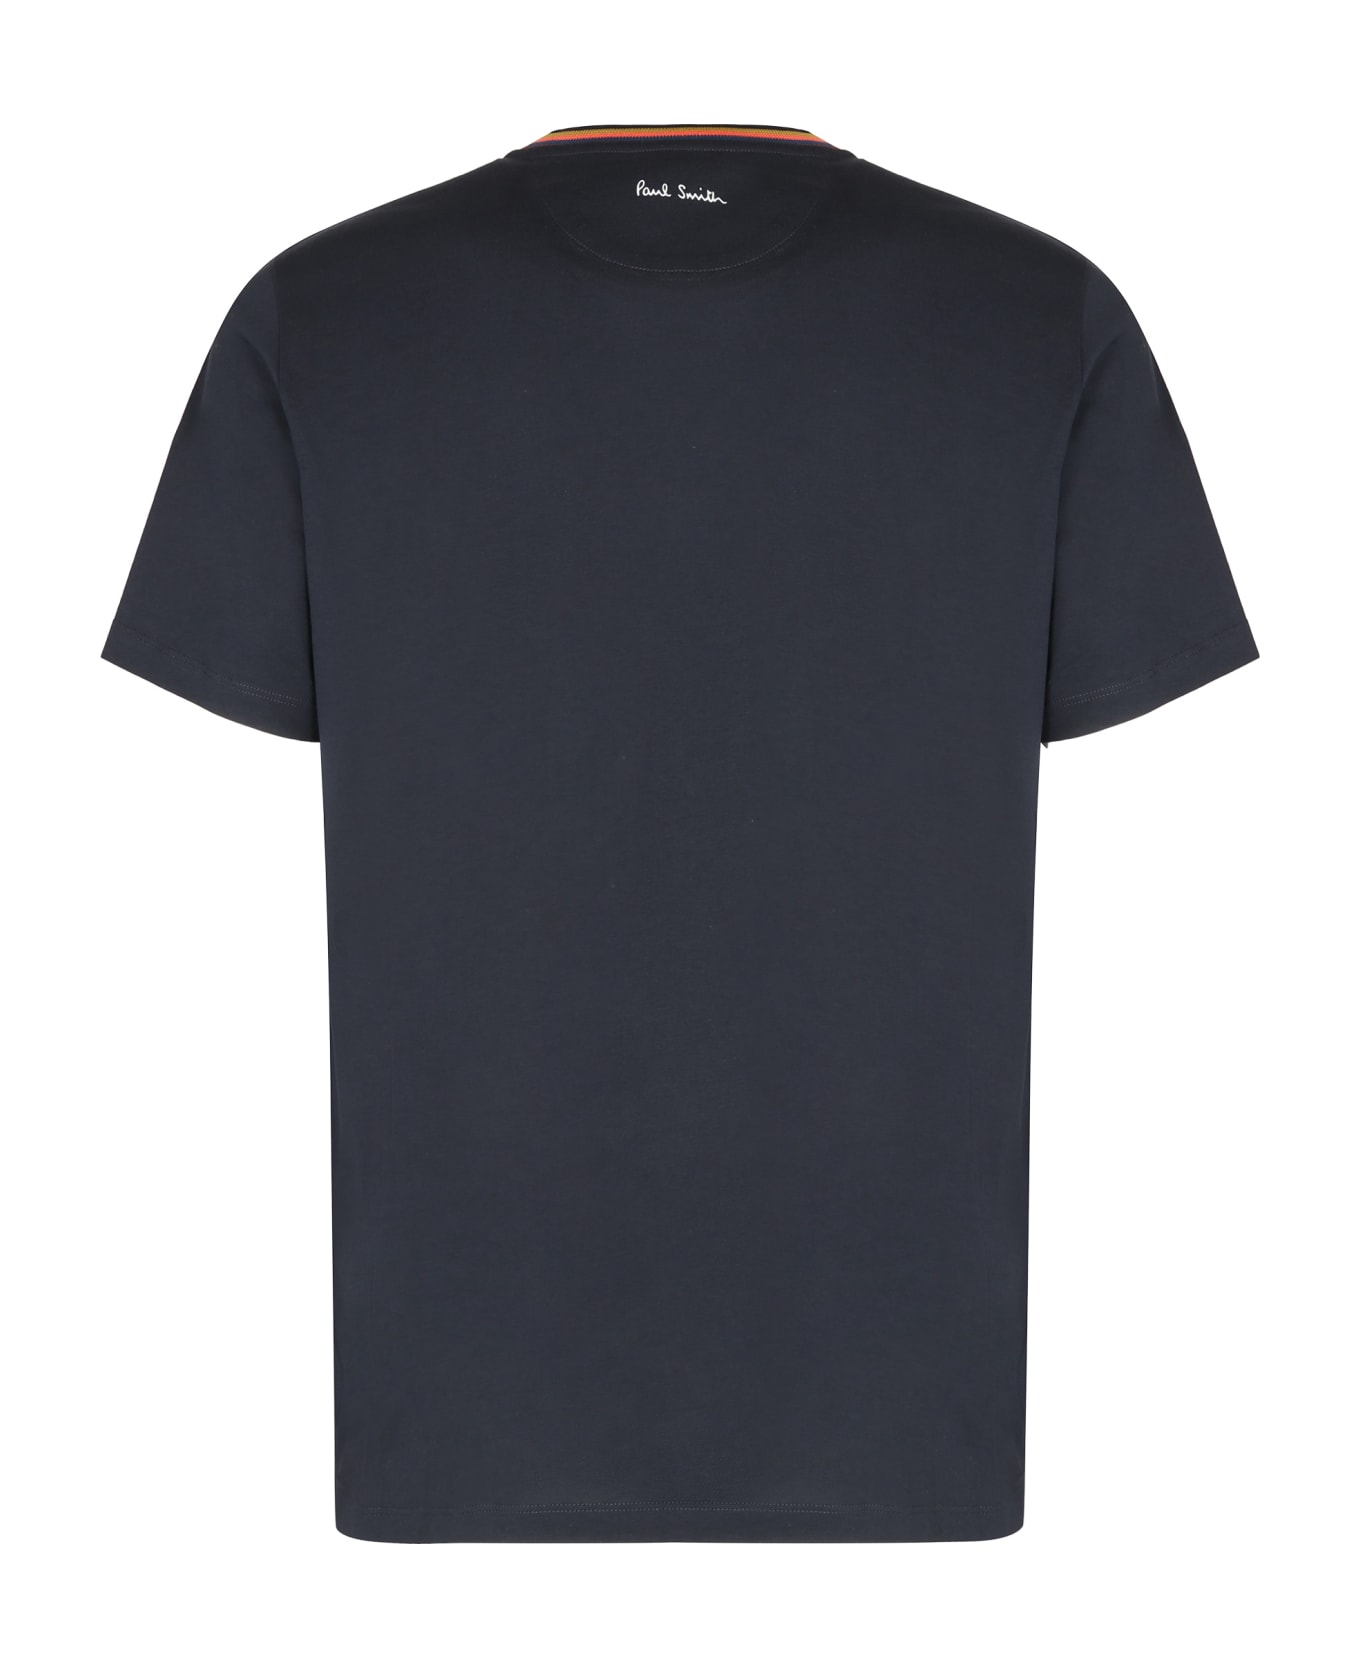 PS by Paul Smith Cotton T-shirt T-Shirt - VERY DARK NAVY